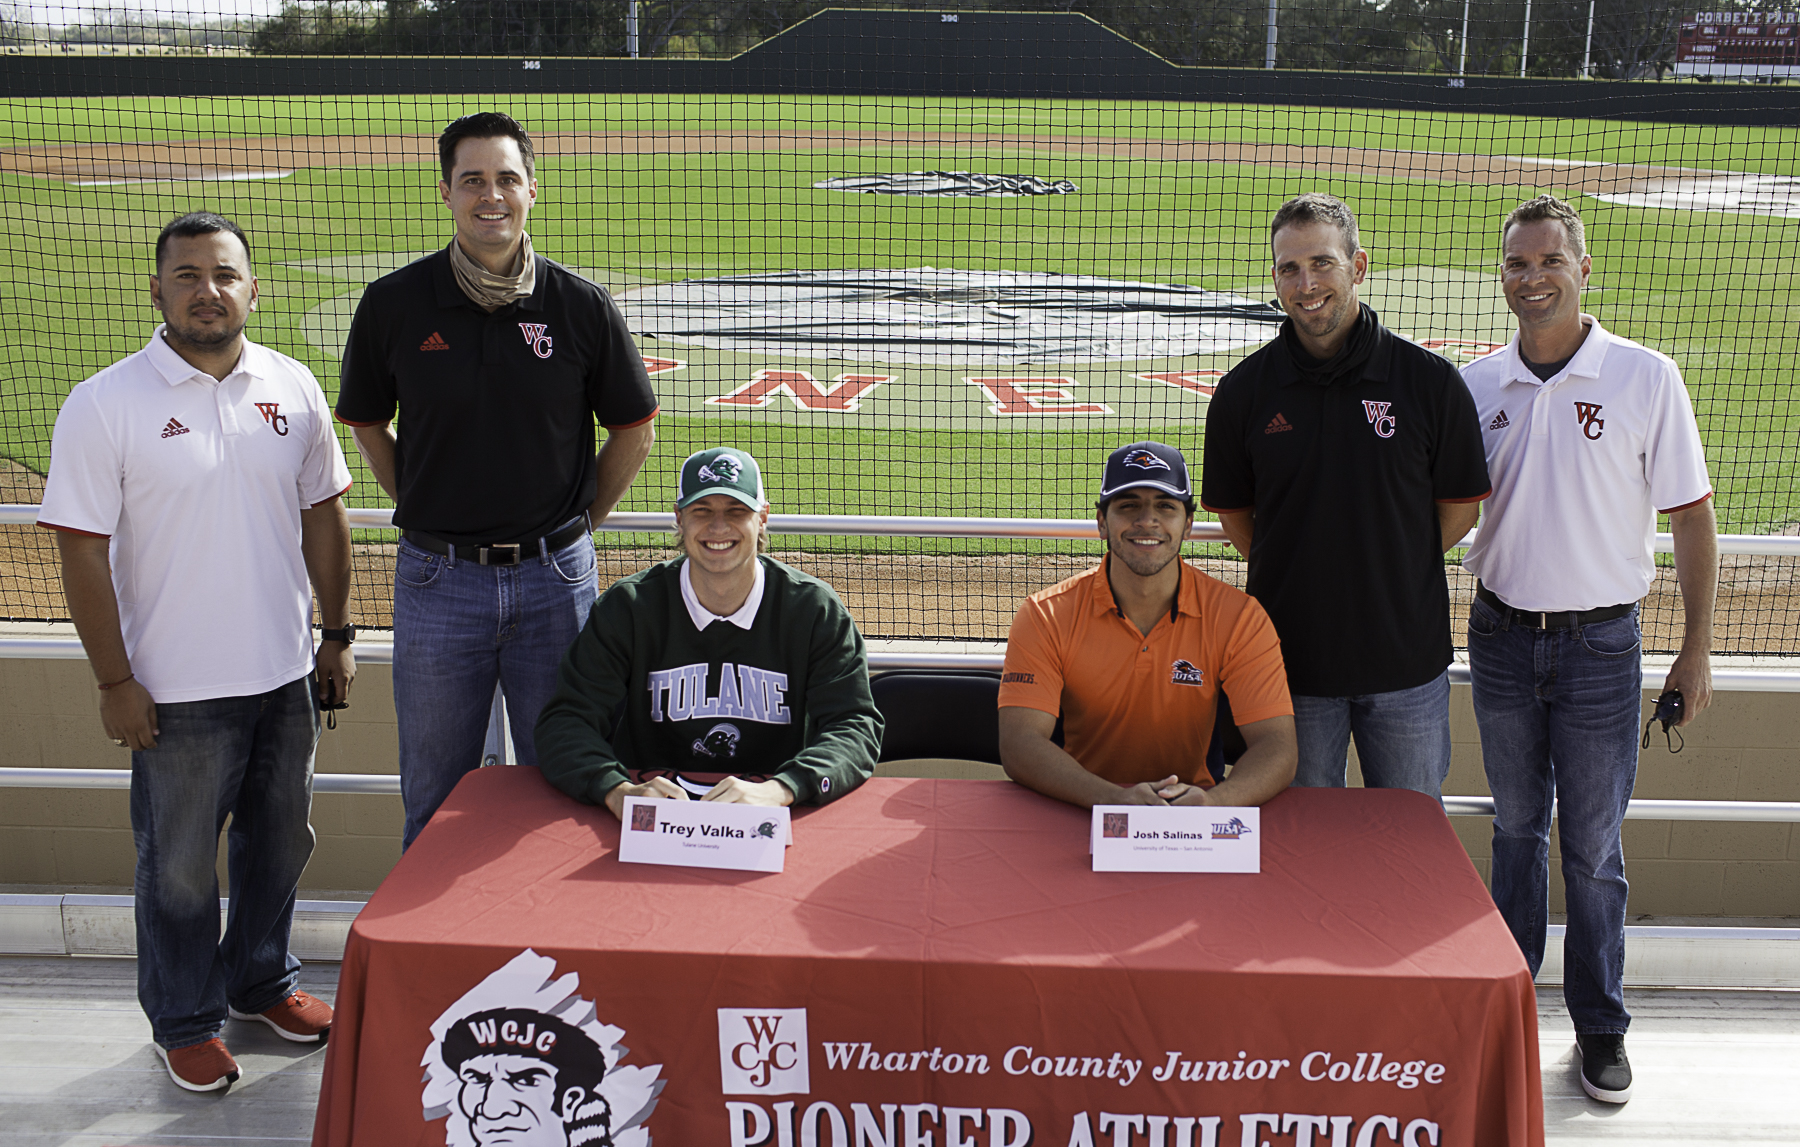 SIGNING DAY - WCJC baseball players sign to play ball at Division 1 universities